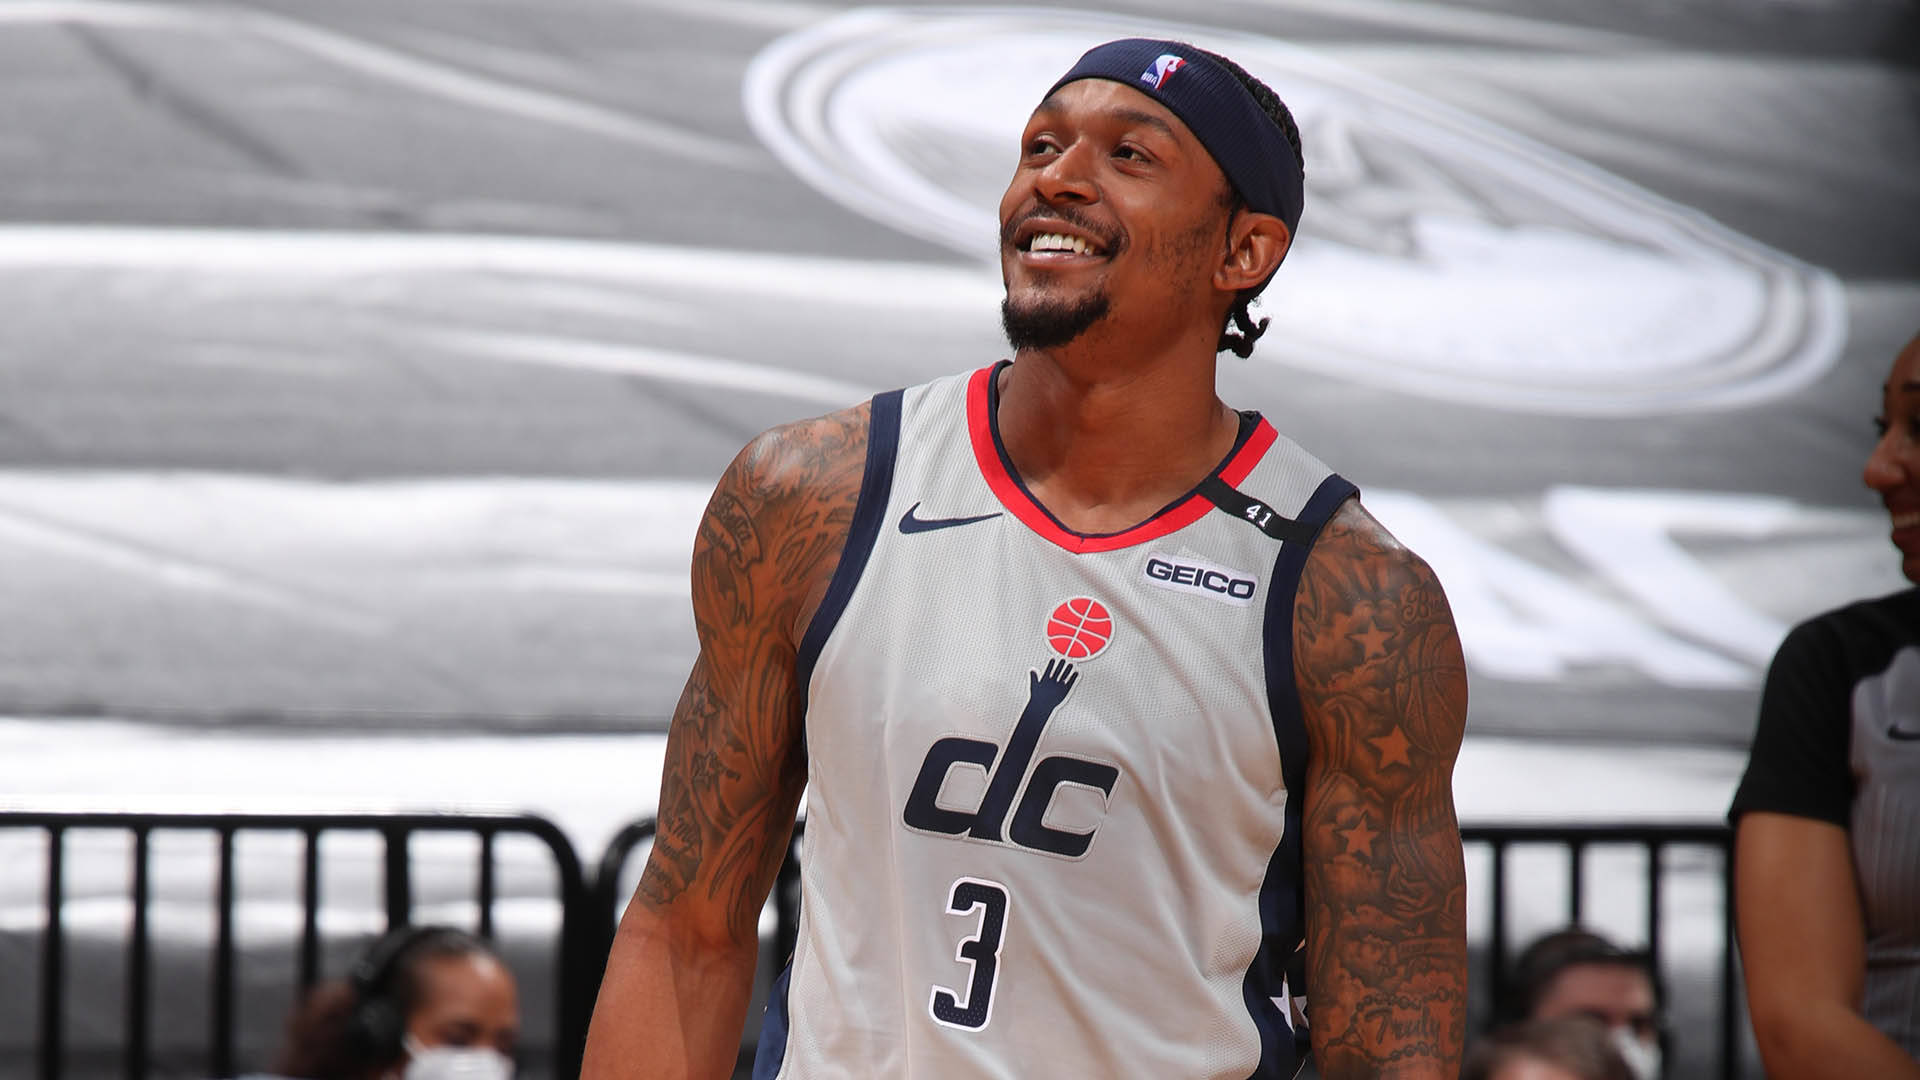 Bradley Beal Candid Photograph Background